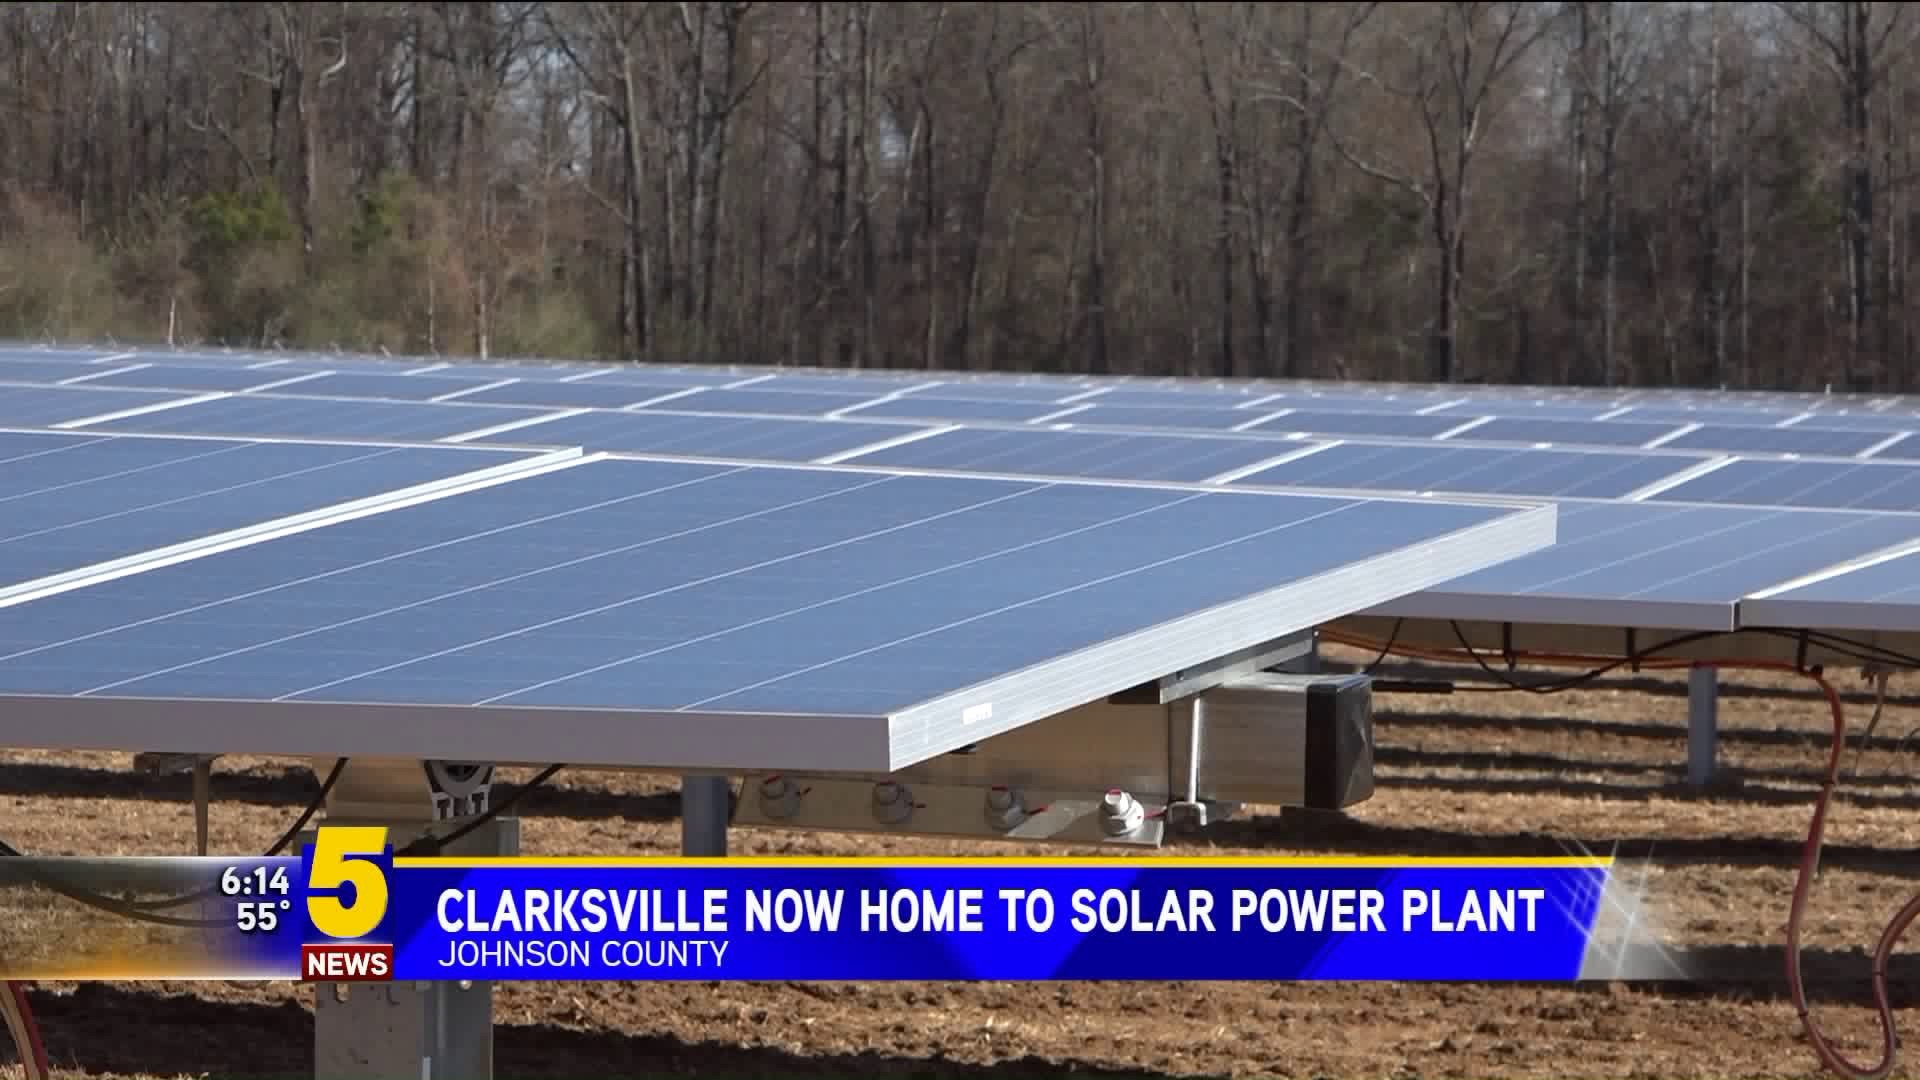 Clarksville Now Home To Solar Power Plant